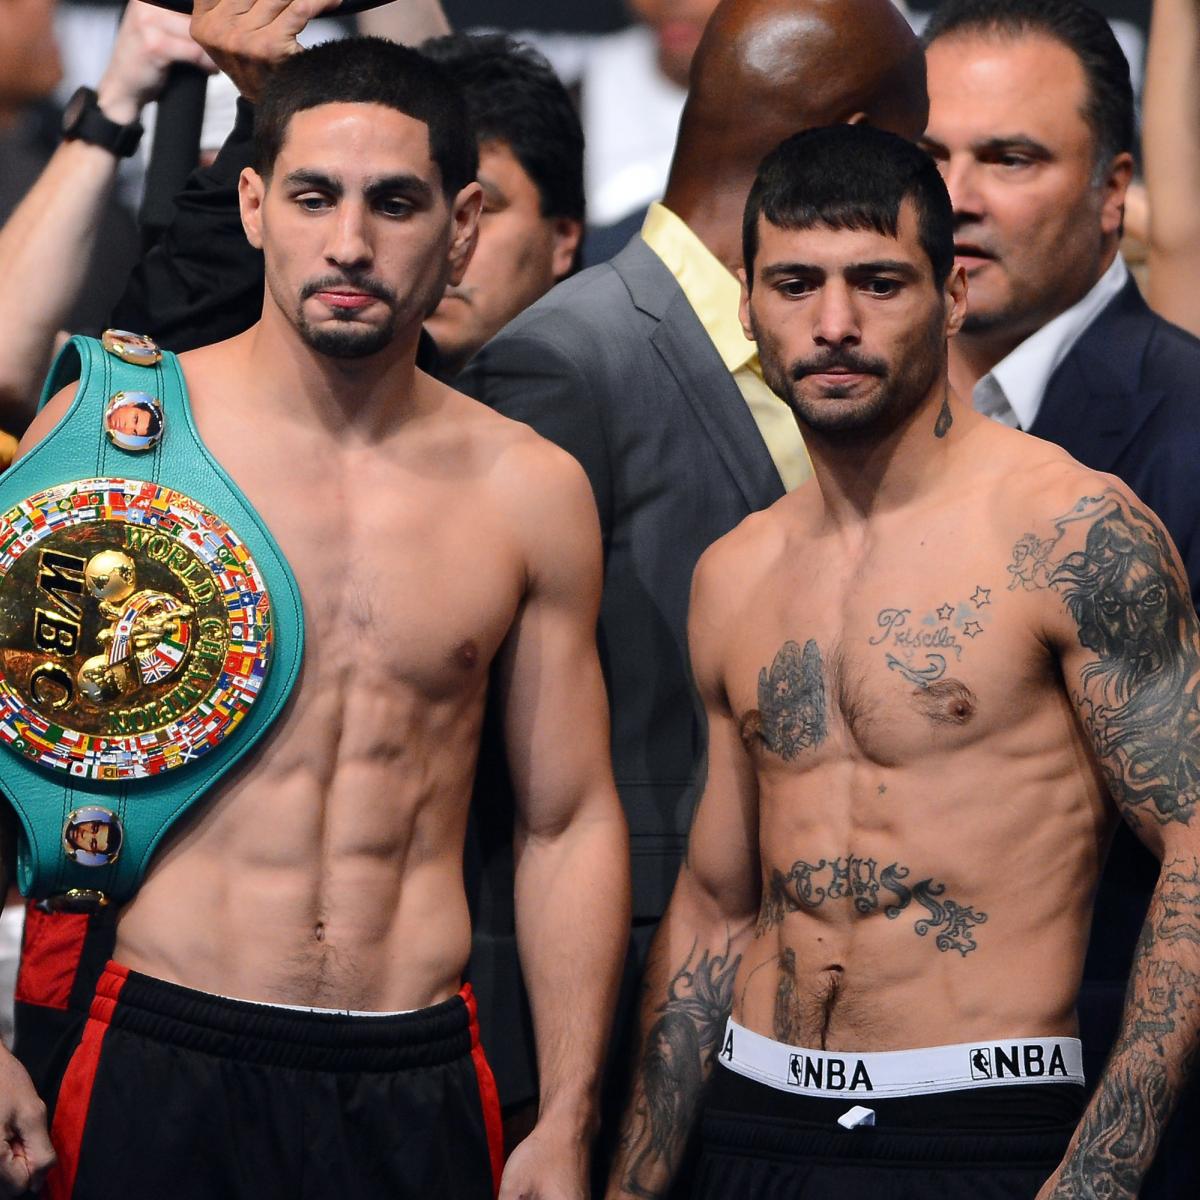 Lucas Matthysse and Danny Garcia Will Rely on Power Punching to Earn Win | Bleacher ...1200 x 1200